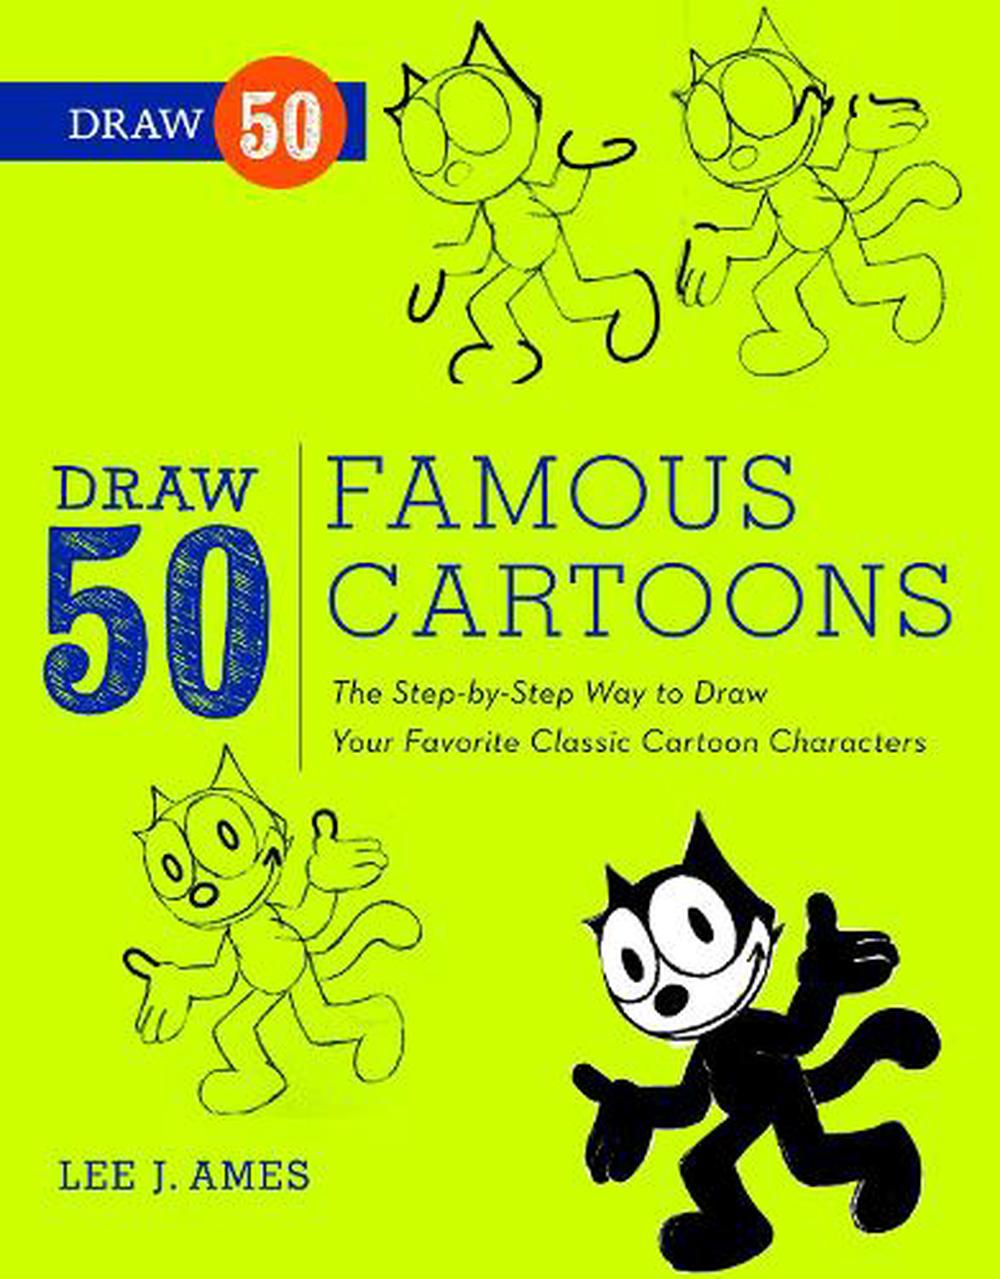 Draw 50 Famous Cartoons The StepByStep Way to Draw Your Favorite